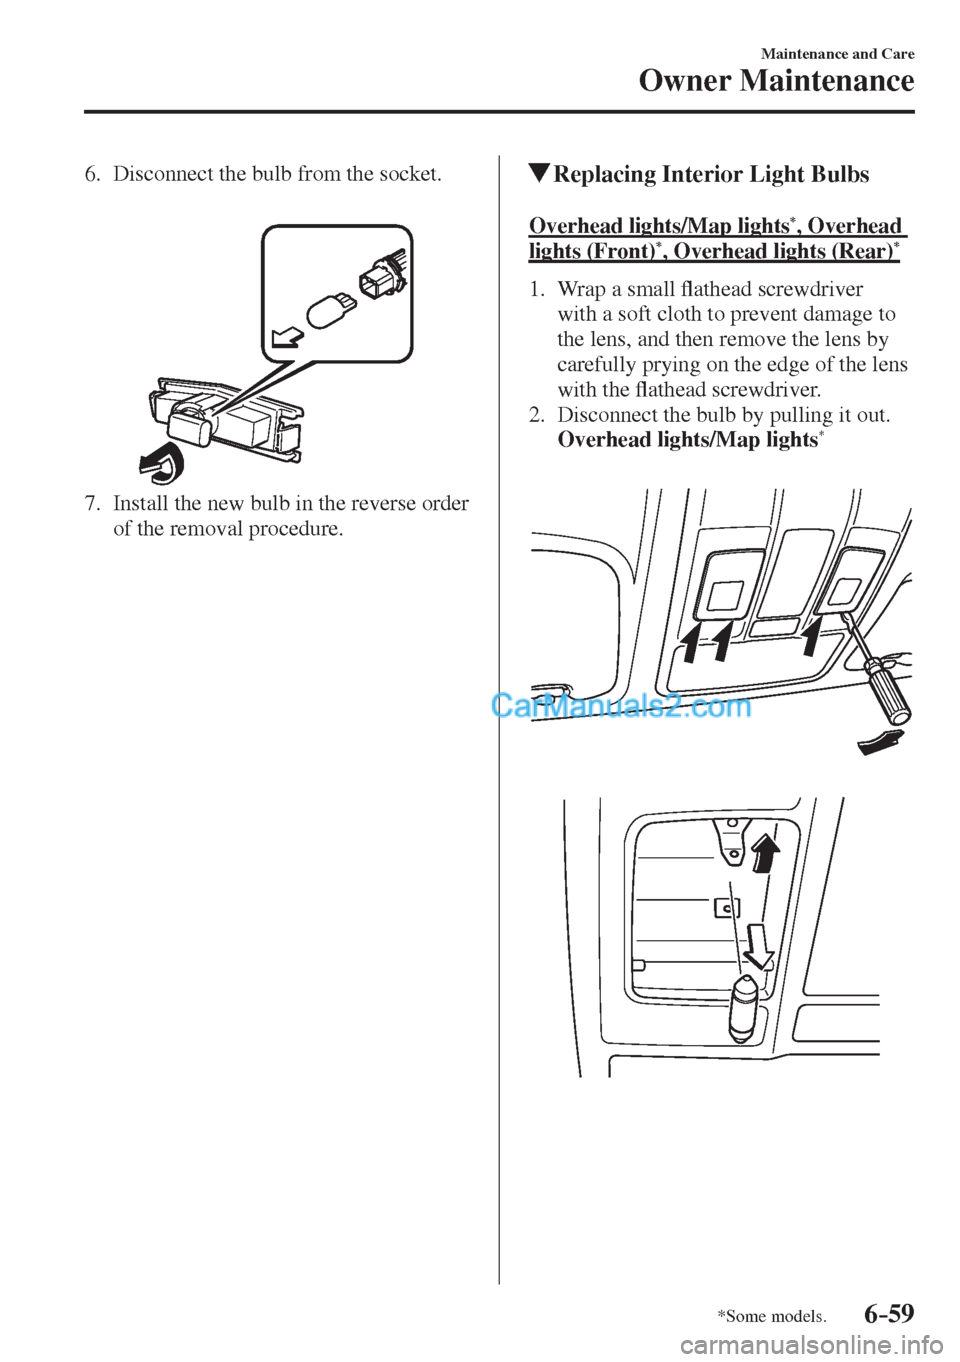 MAZDA MODEL 2 2017  Owners Manual (in English) 6–59
Maintenance and Care
Owner Maintenance
*Some models.
   6.   Disconnect the bulb from the socket.
   
 
 
   7.   Install the new bulb in the reverse order 
of the removal procedure.
    
     